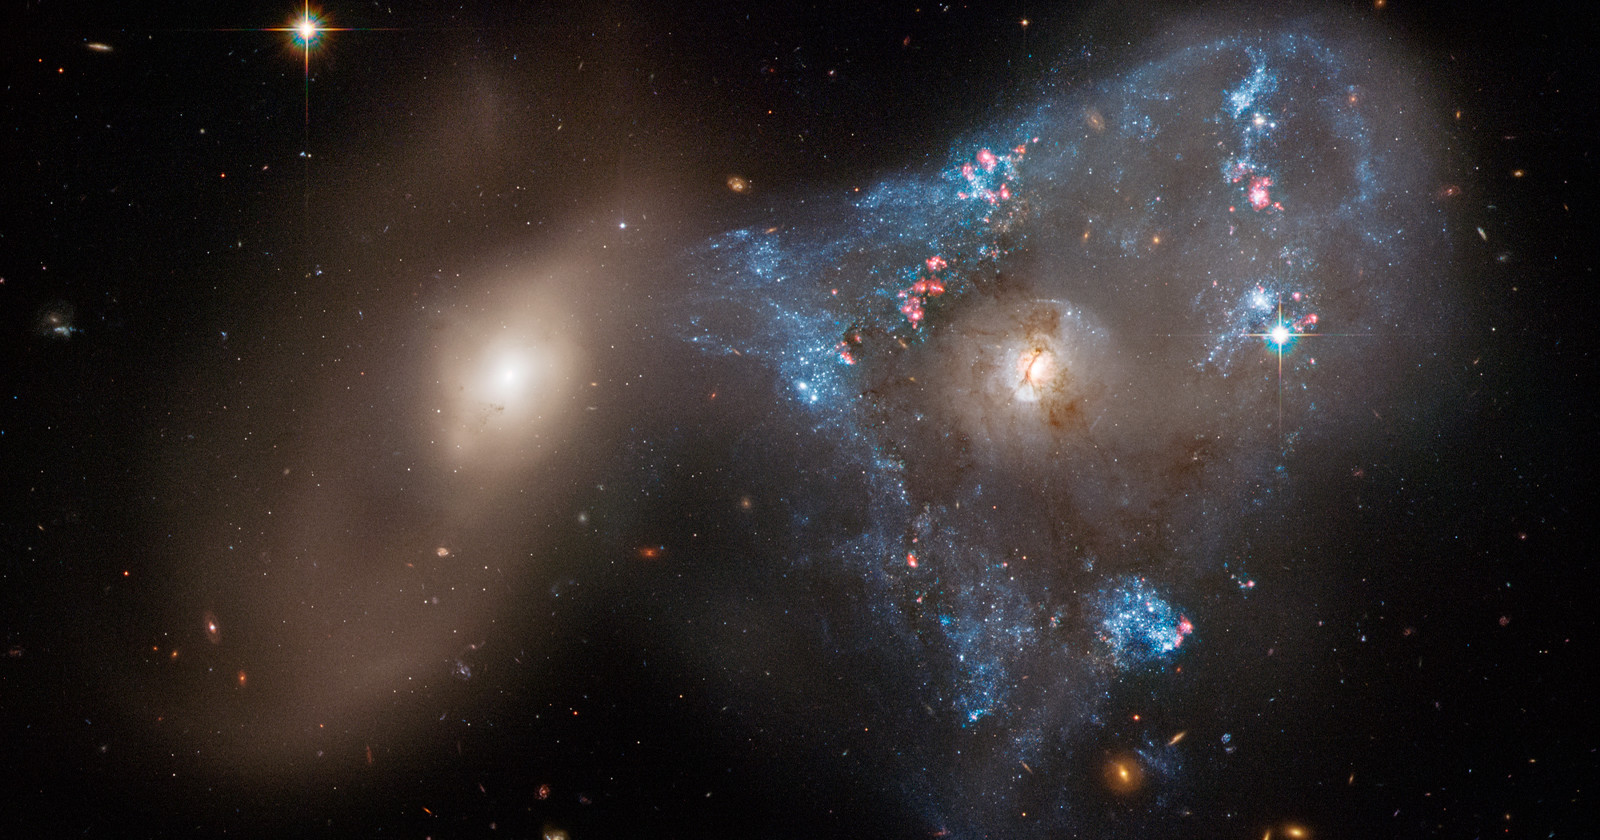  hubble captures space triangle created colliding galaxies 